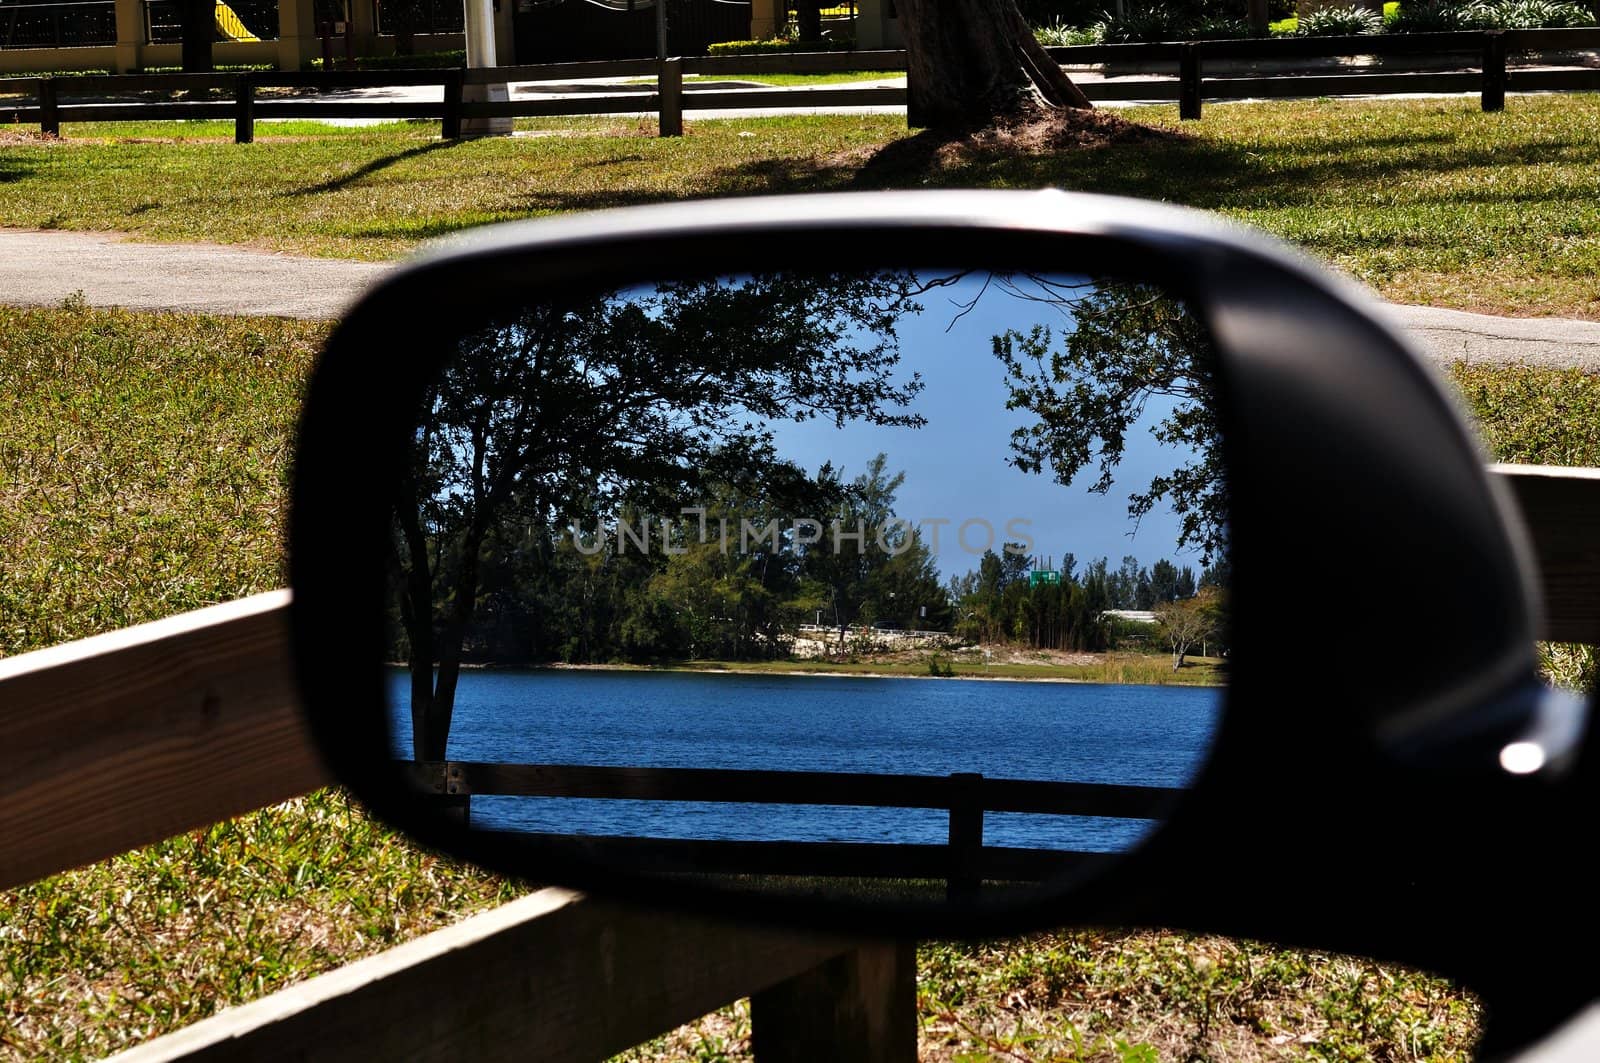 Lake reflected in the sideview mirror of a parked car.